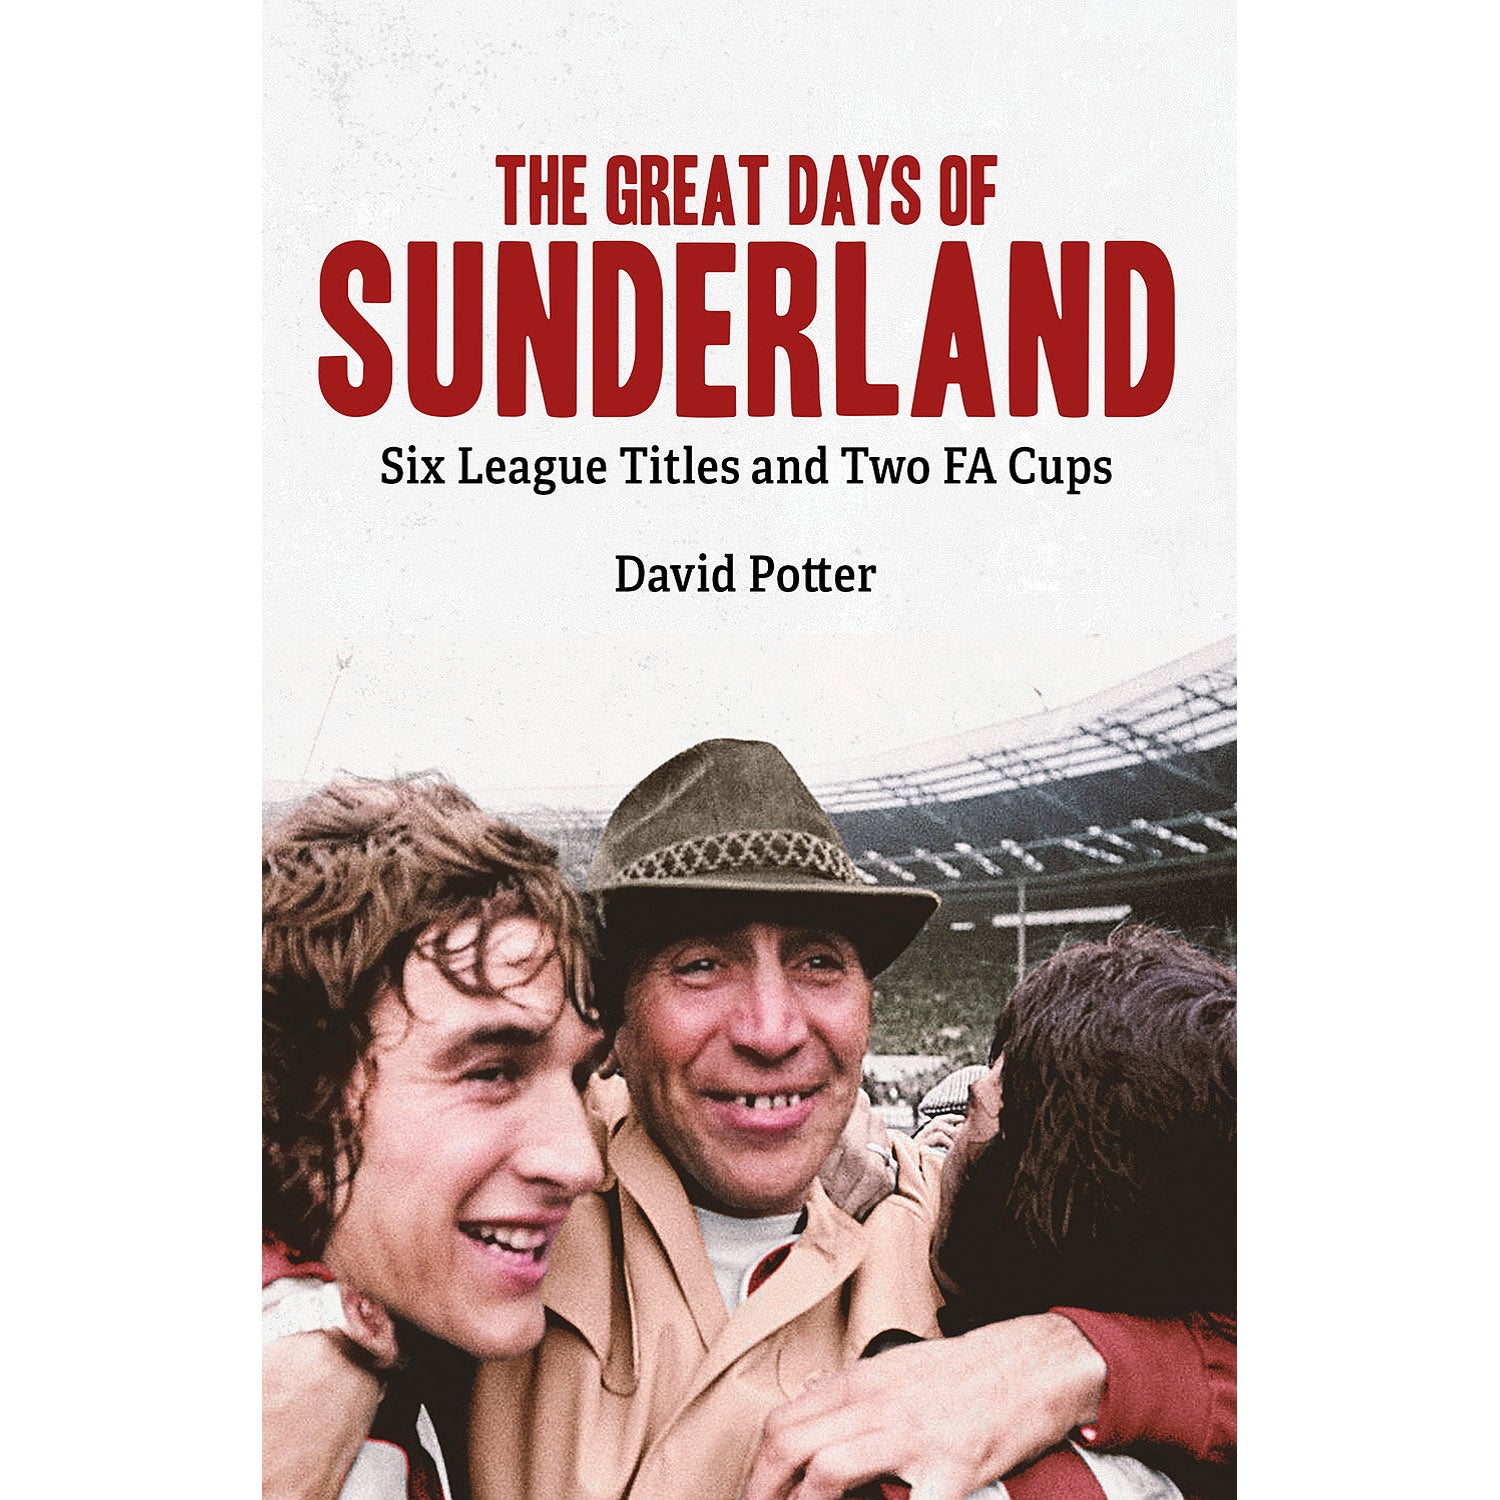 The Great Days of Sunderland – Six League Titles and Two F.A. Cups